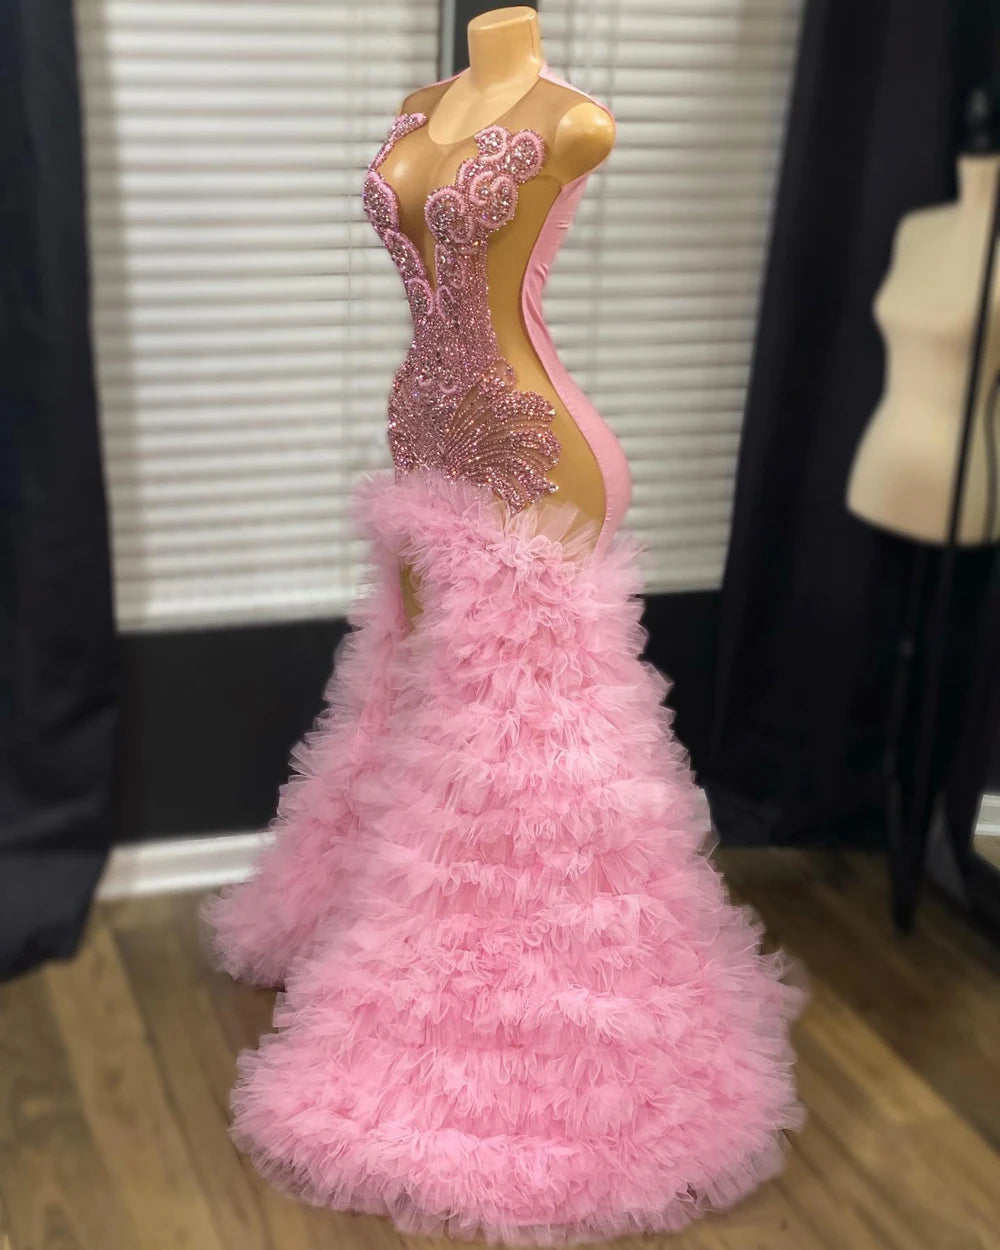 Pink Feathered Sequin Mermaid Evening Gown Dress